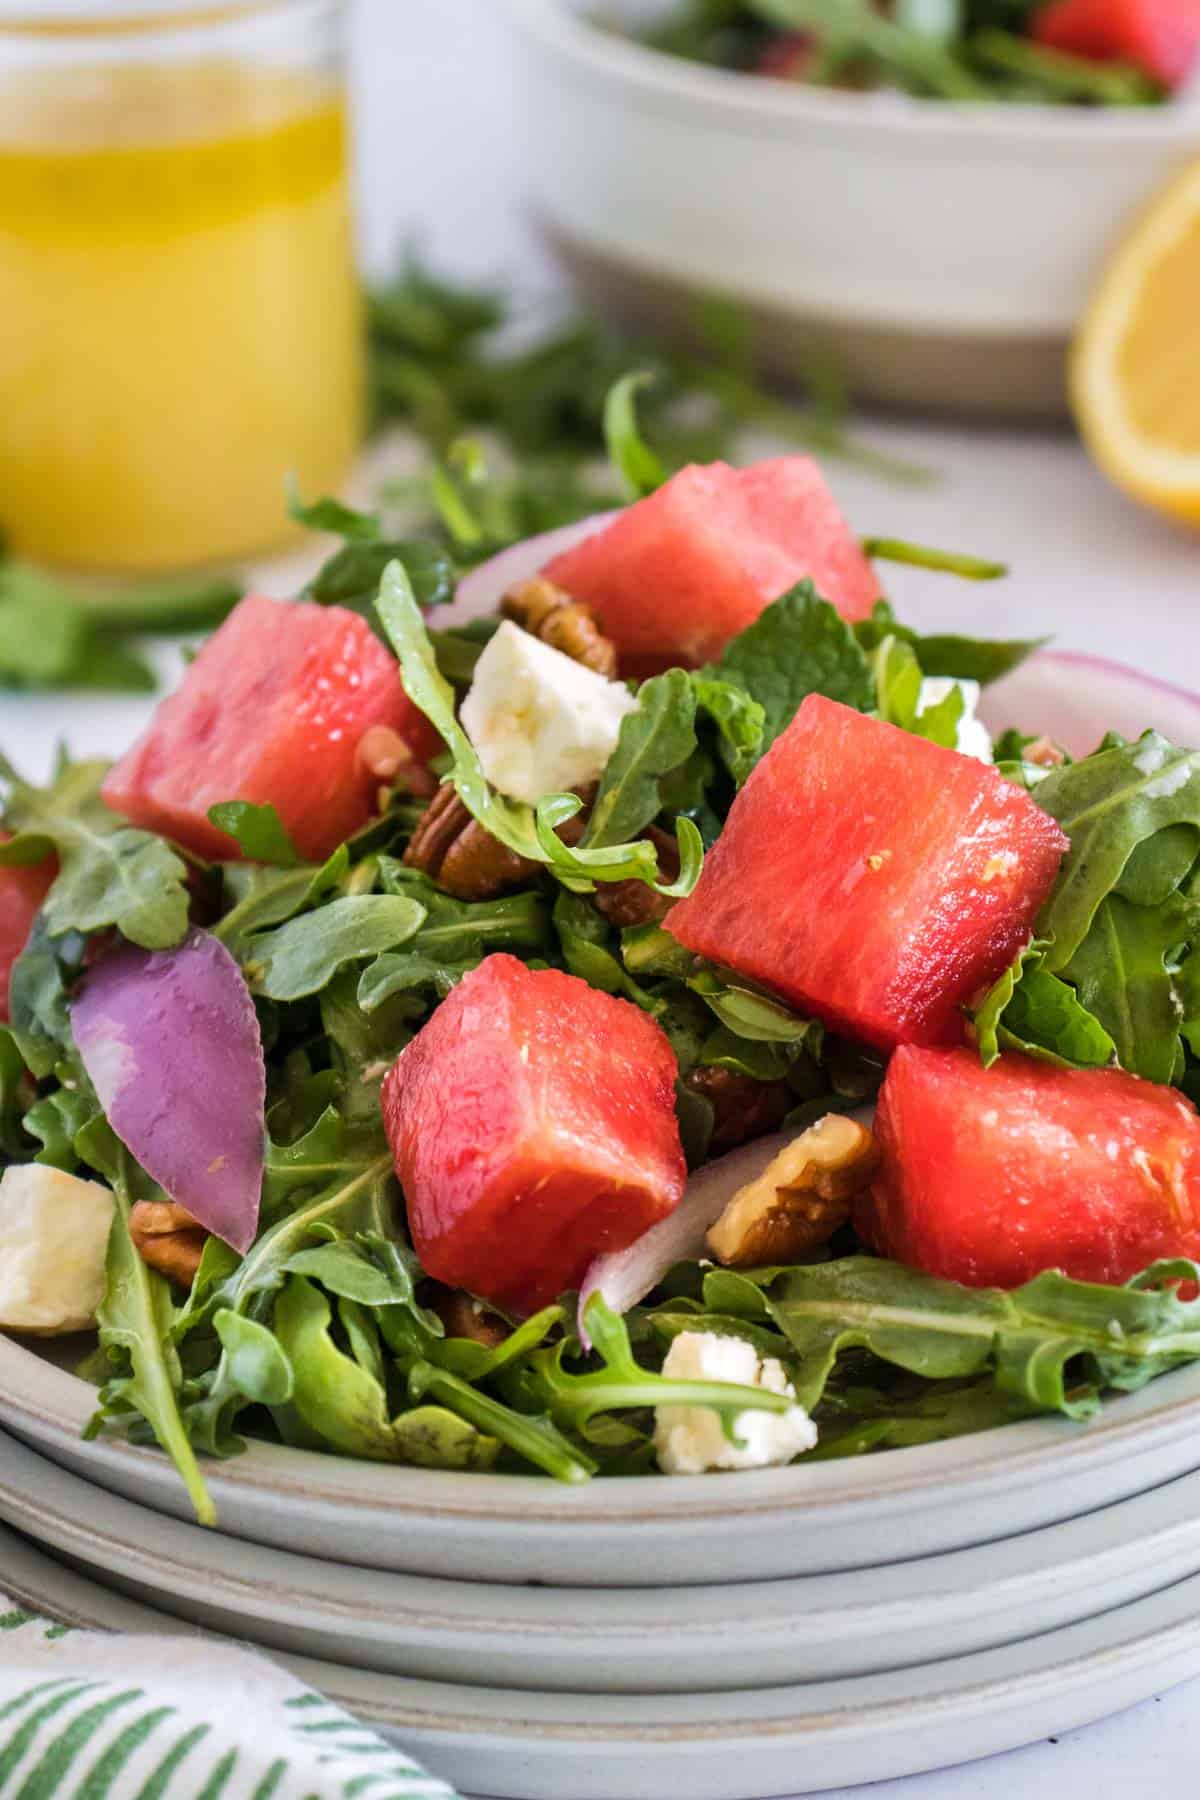 An arugula salad with watermelon and feta cheese on a plate.